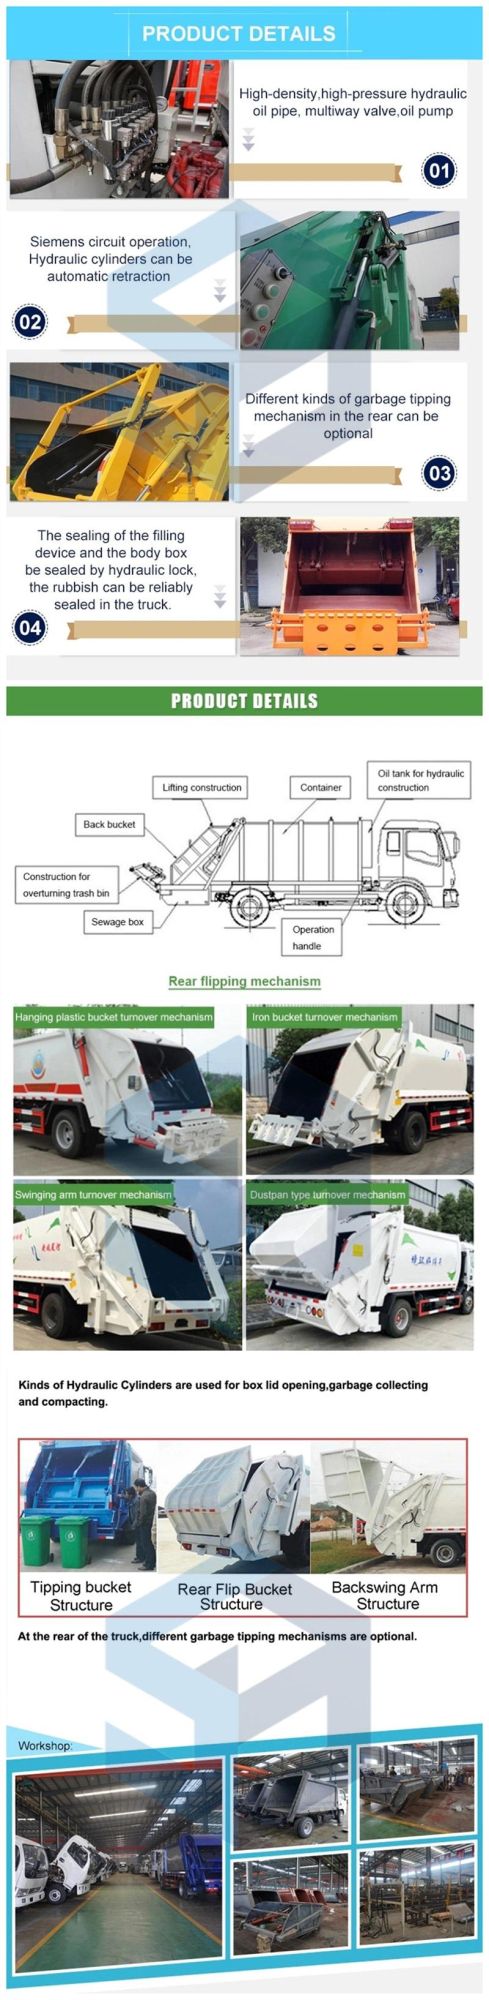 China Manufacturer 4X2 12 Cbm Dongfeng Trash Truck Garbage Compactor Recycling Truck